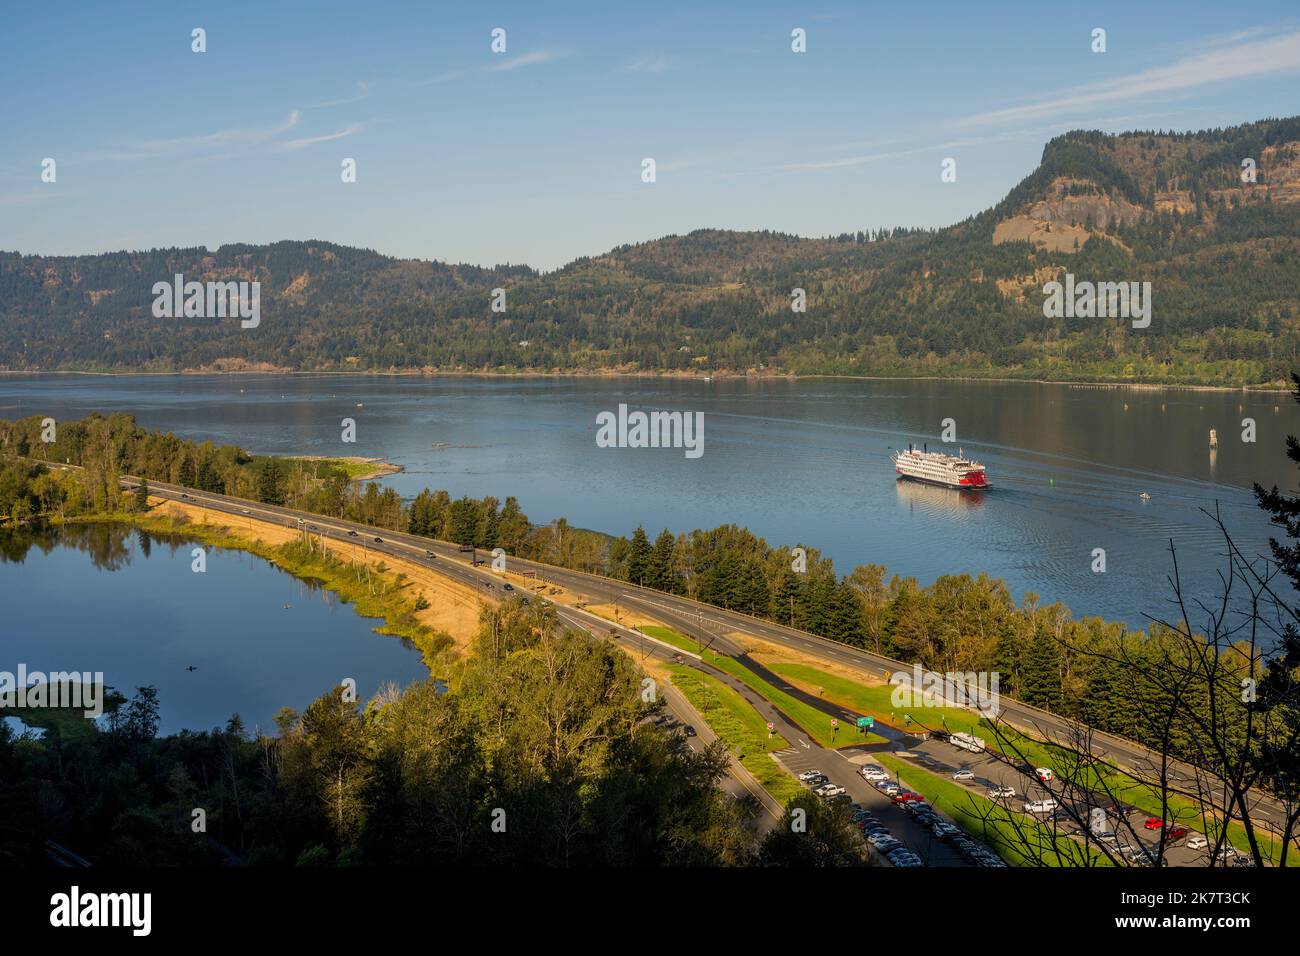 View of the Columbia River from the Multnomah Falls trail with the American Empress Riverboat, a paddle-wheeler, near Portland along the Columbia Rive Stock Photo